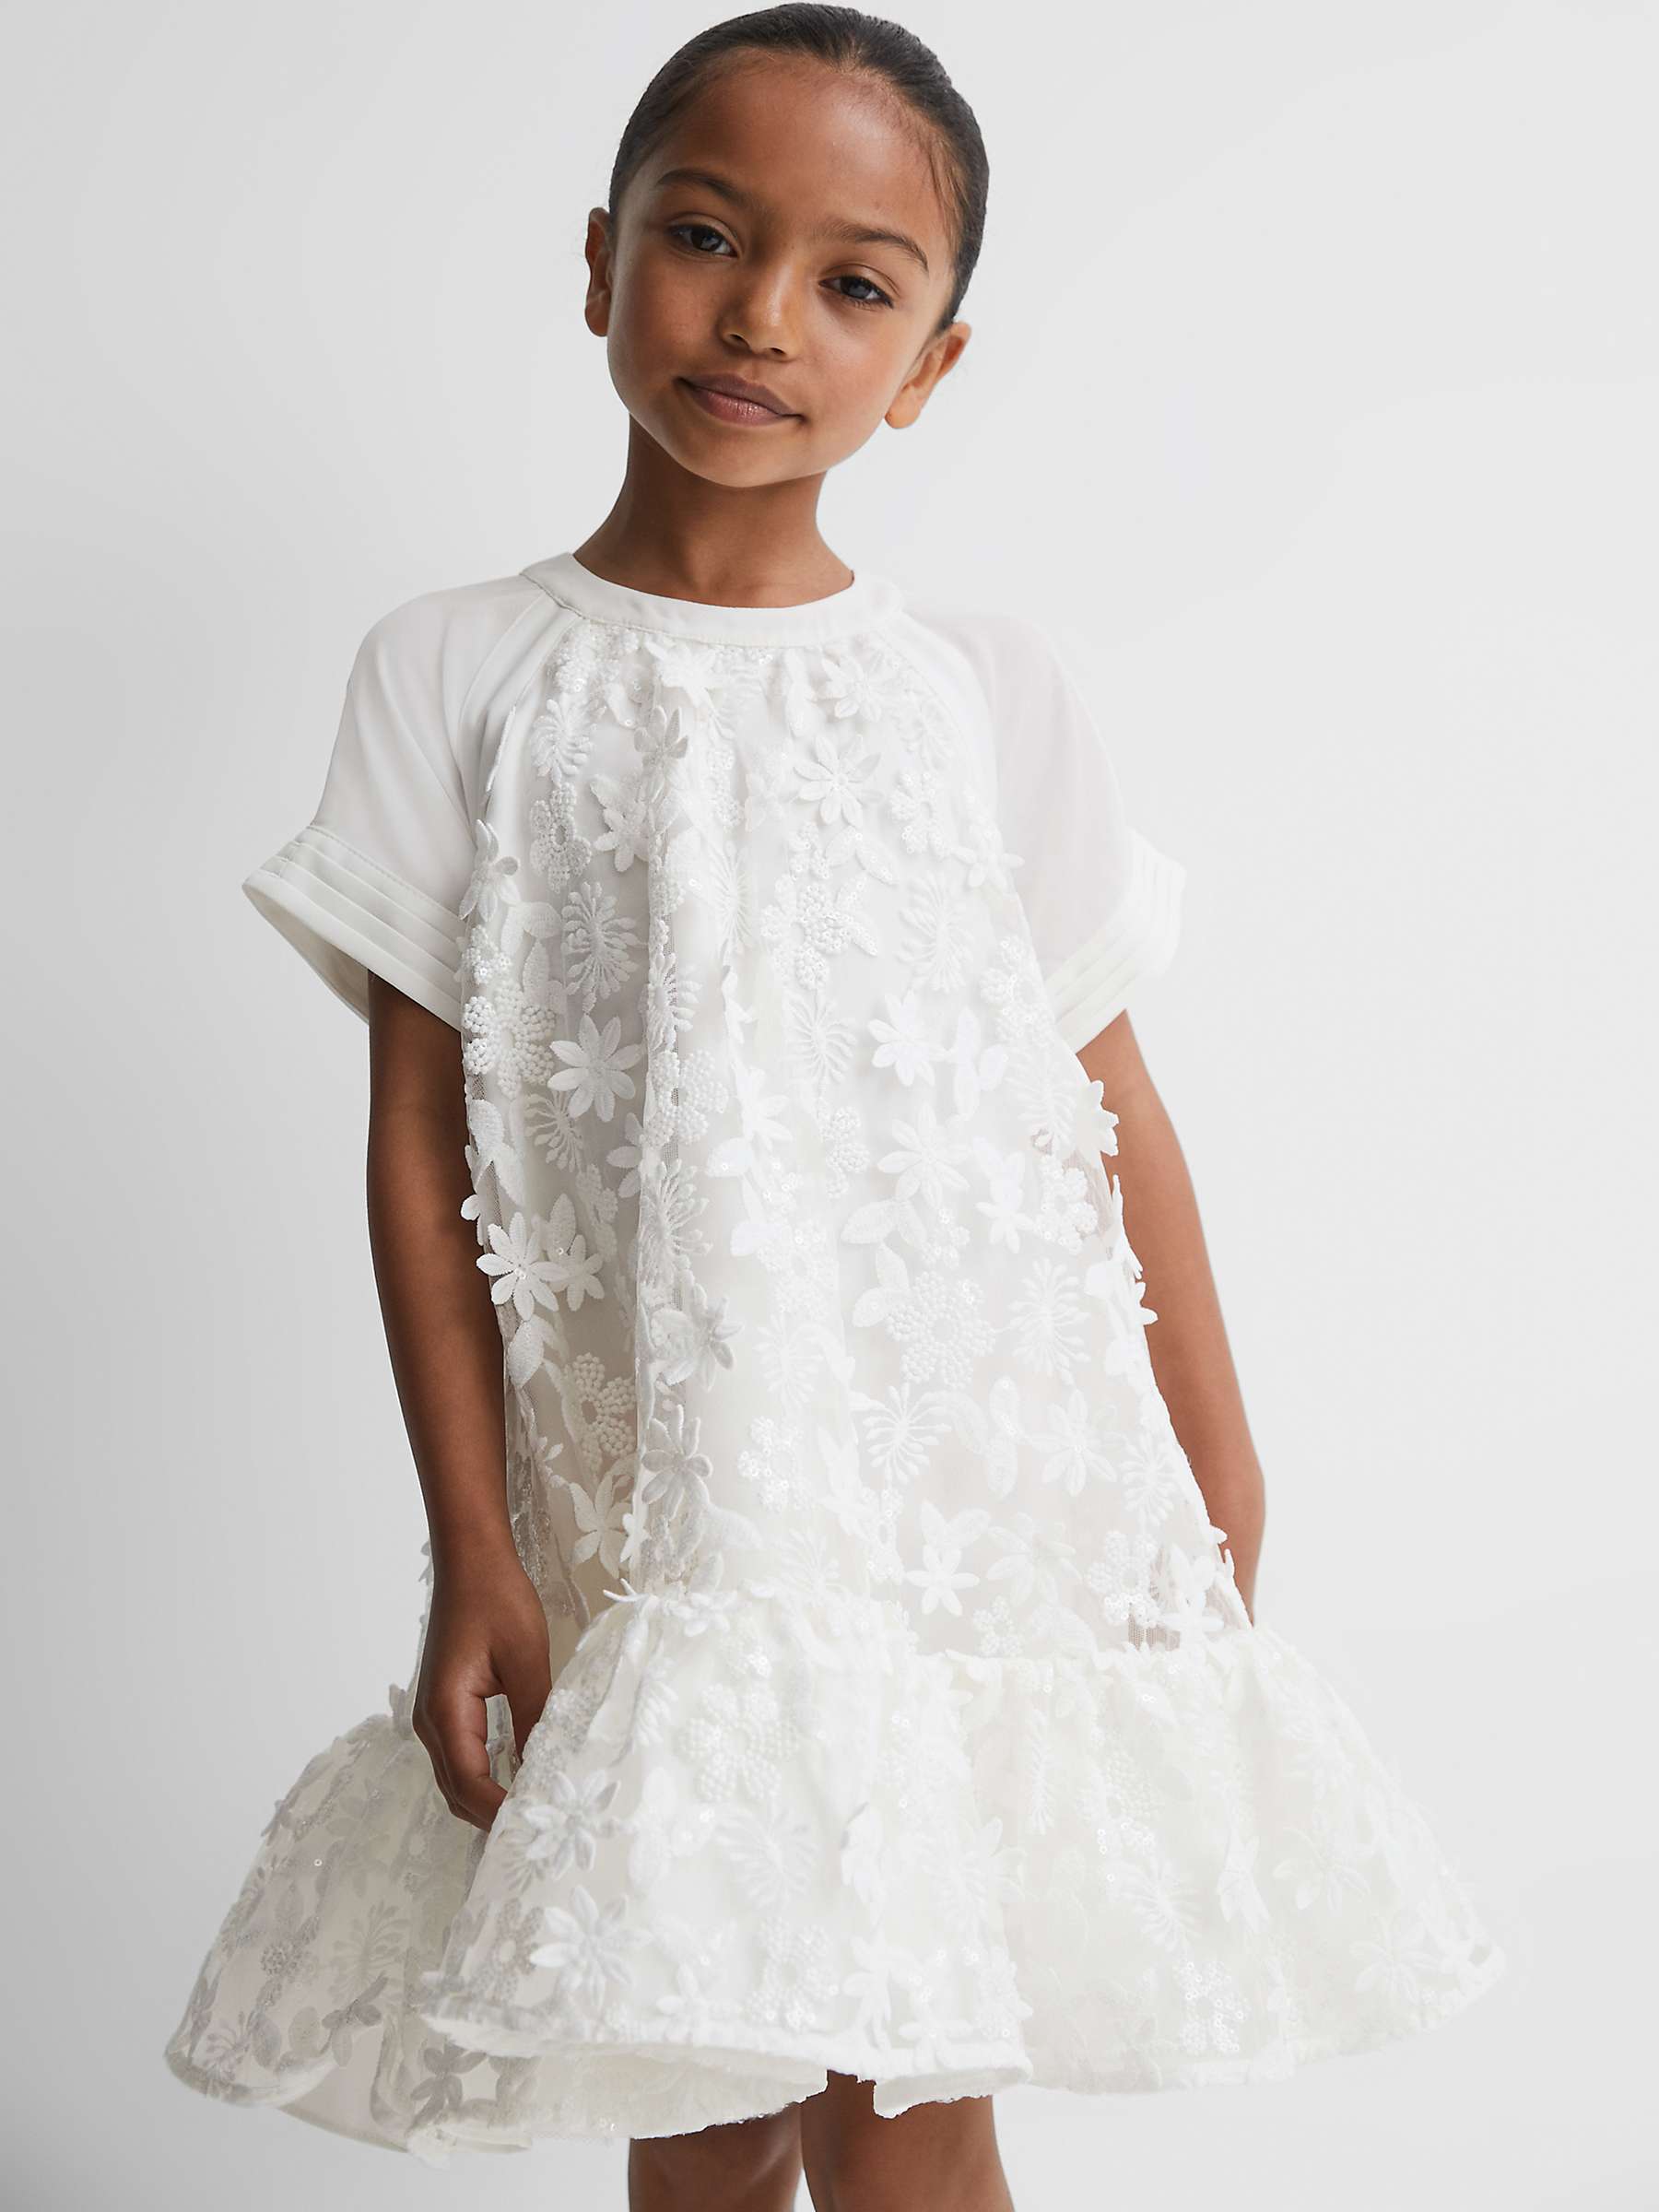 Buy Reiss Kids' Theo Floral Lace Dress, Ivory Online at johnlewis.com